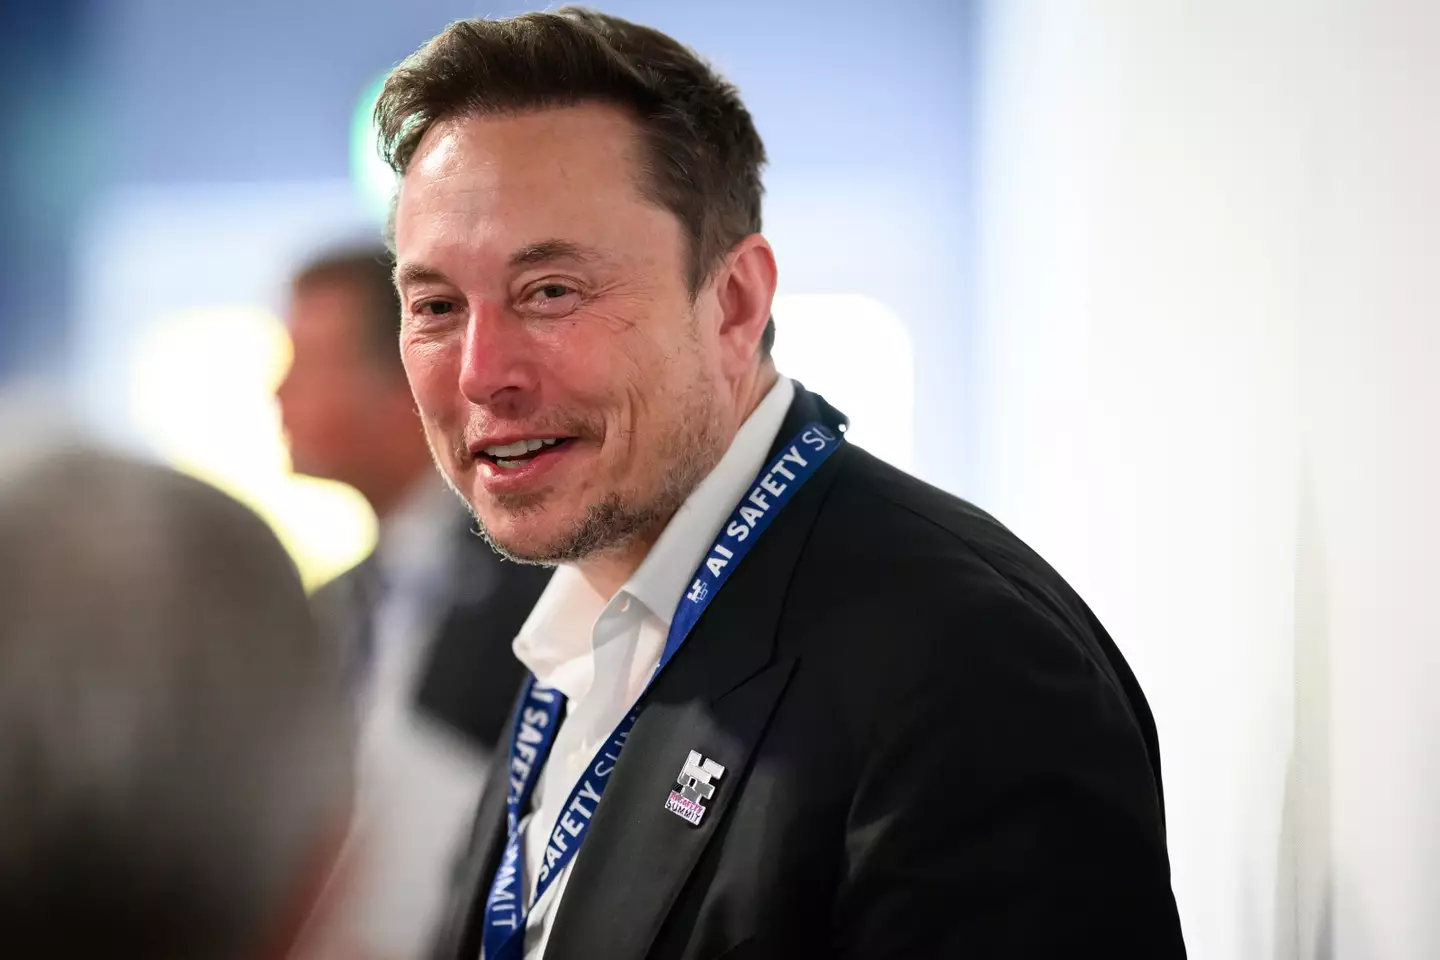 Elon Musk has been quoted as telling Business Insider that there is 'some chance it (AI) will end humanity'.